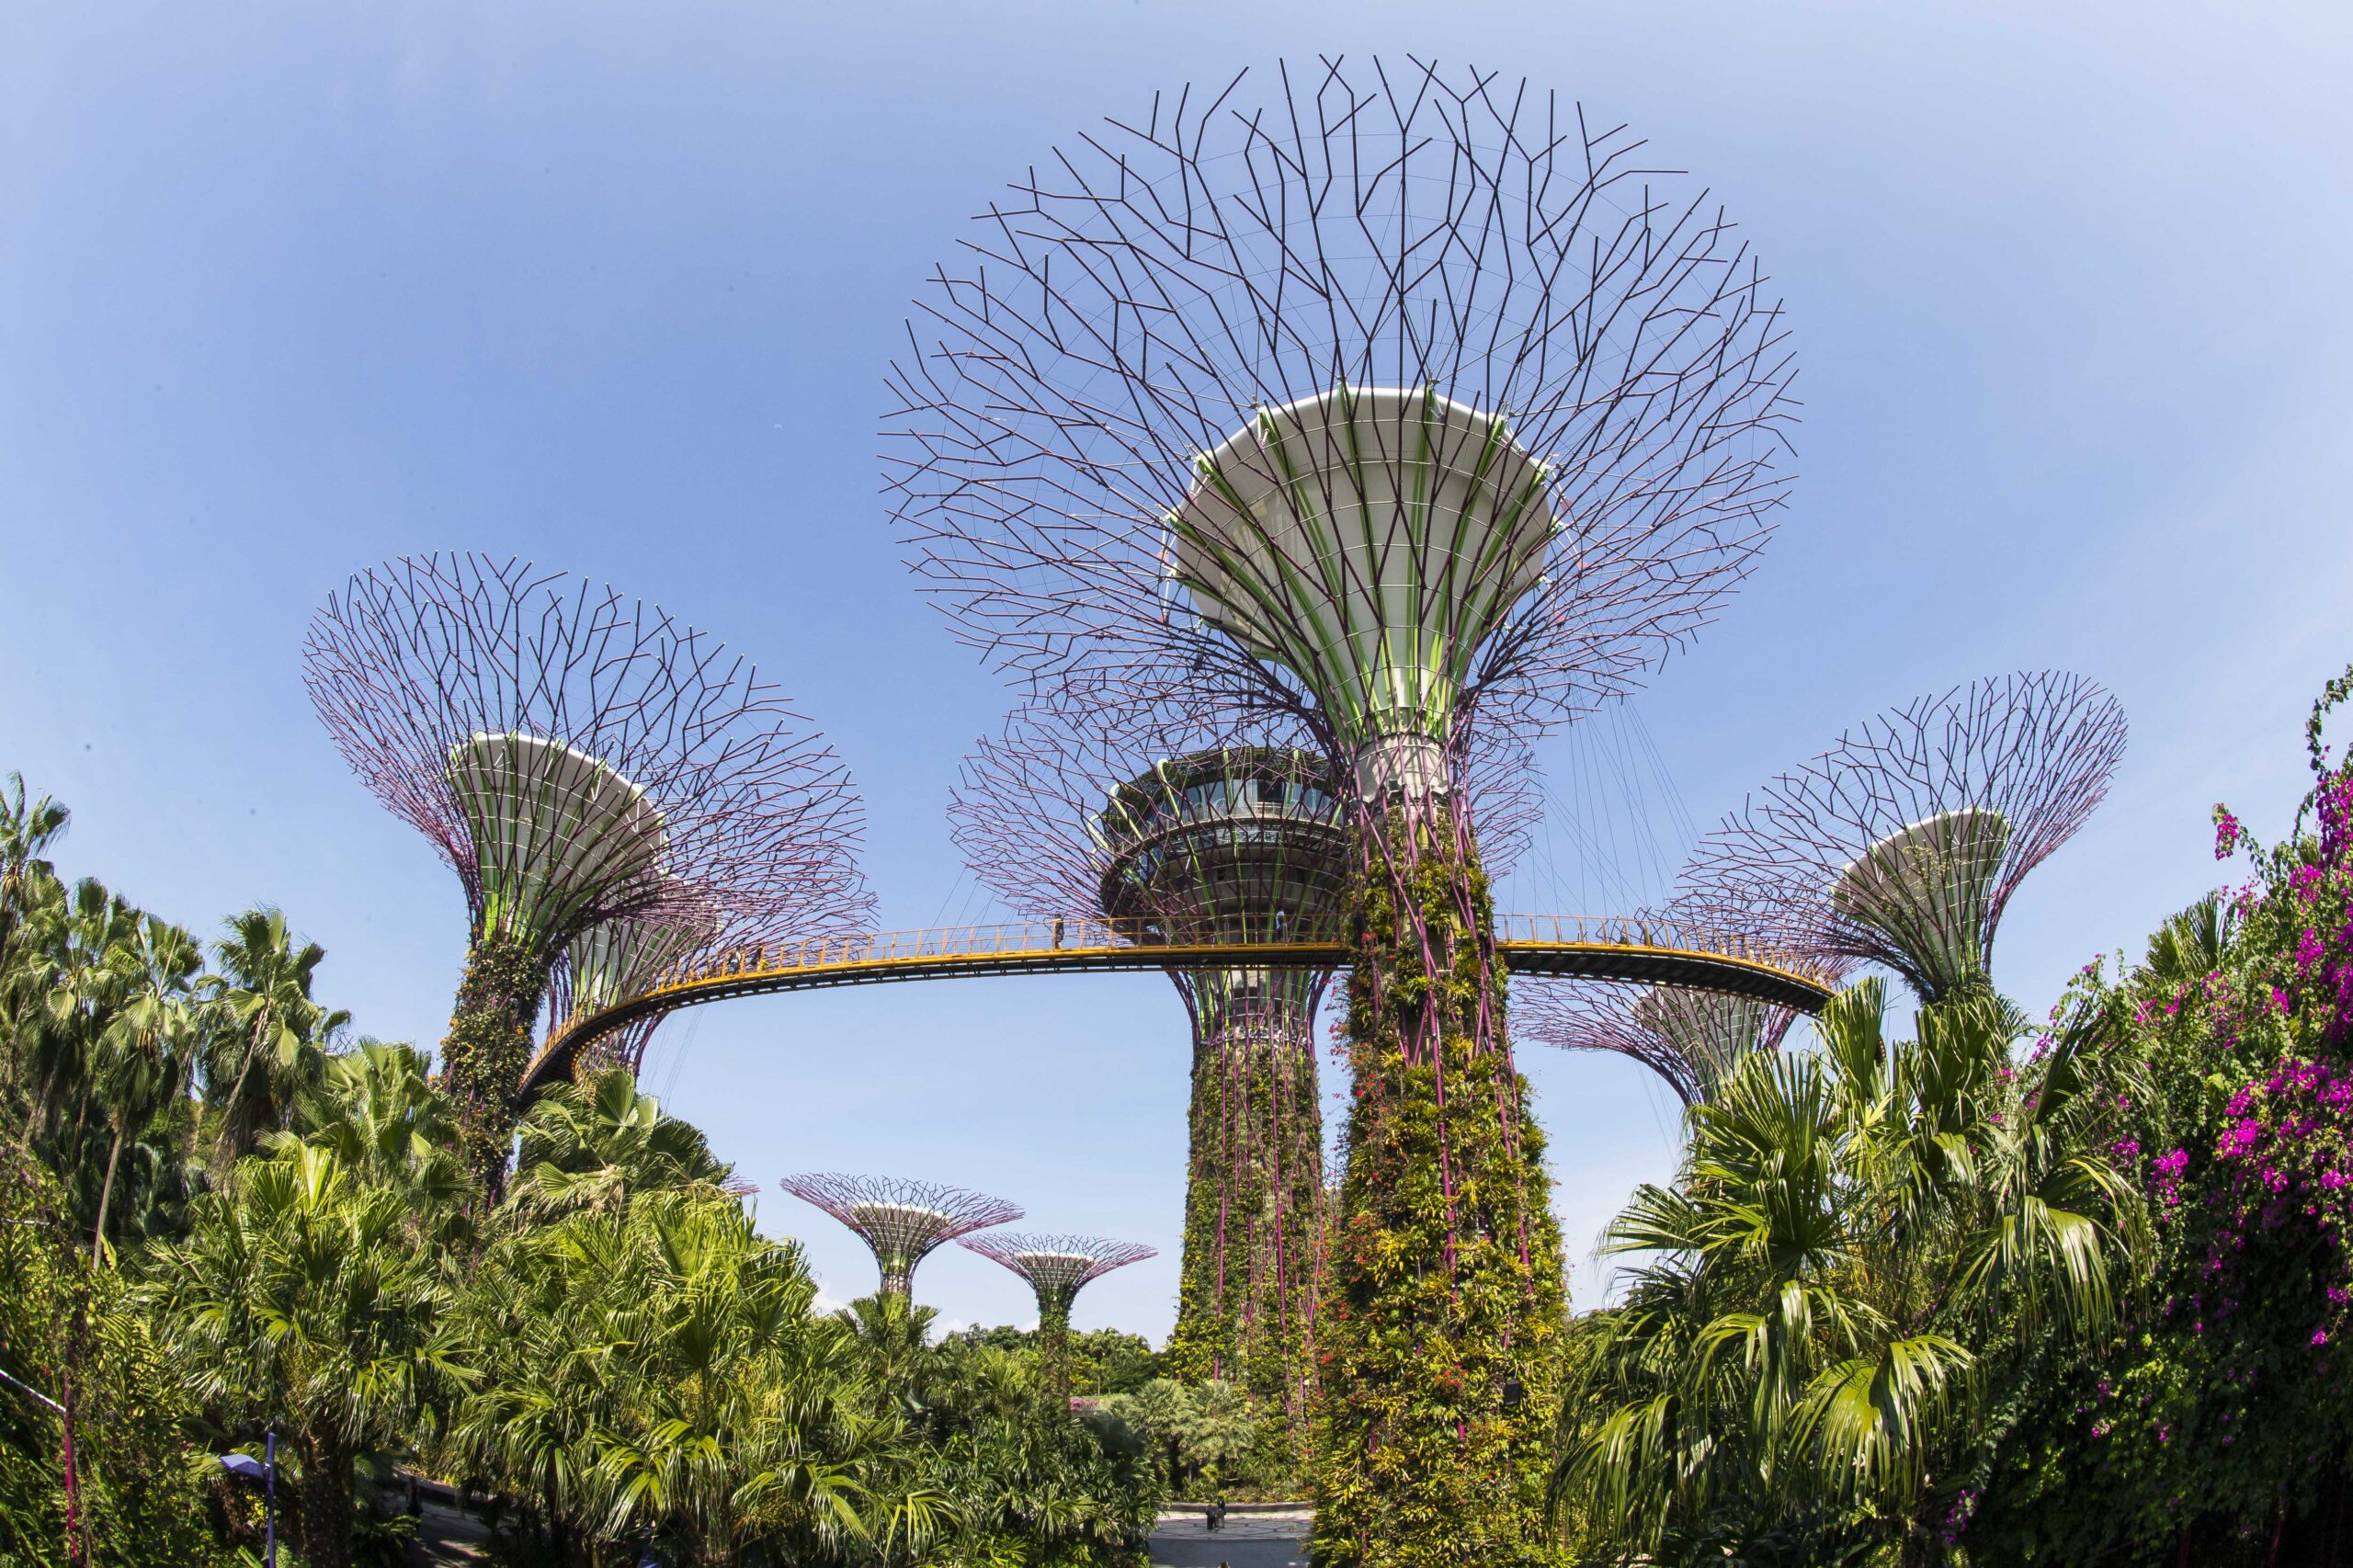 Supertrees are man-made tree-like structures that collect rainwater, produce solar power and act as exhausts for nearby conservatories. They’re pictured surrounded by plants against a blue sky.